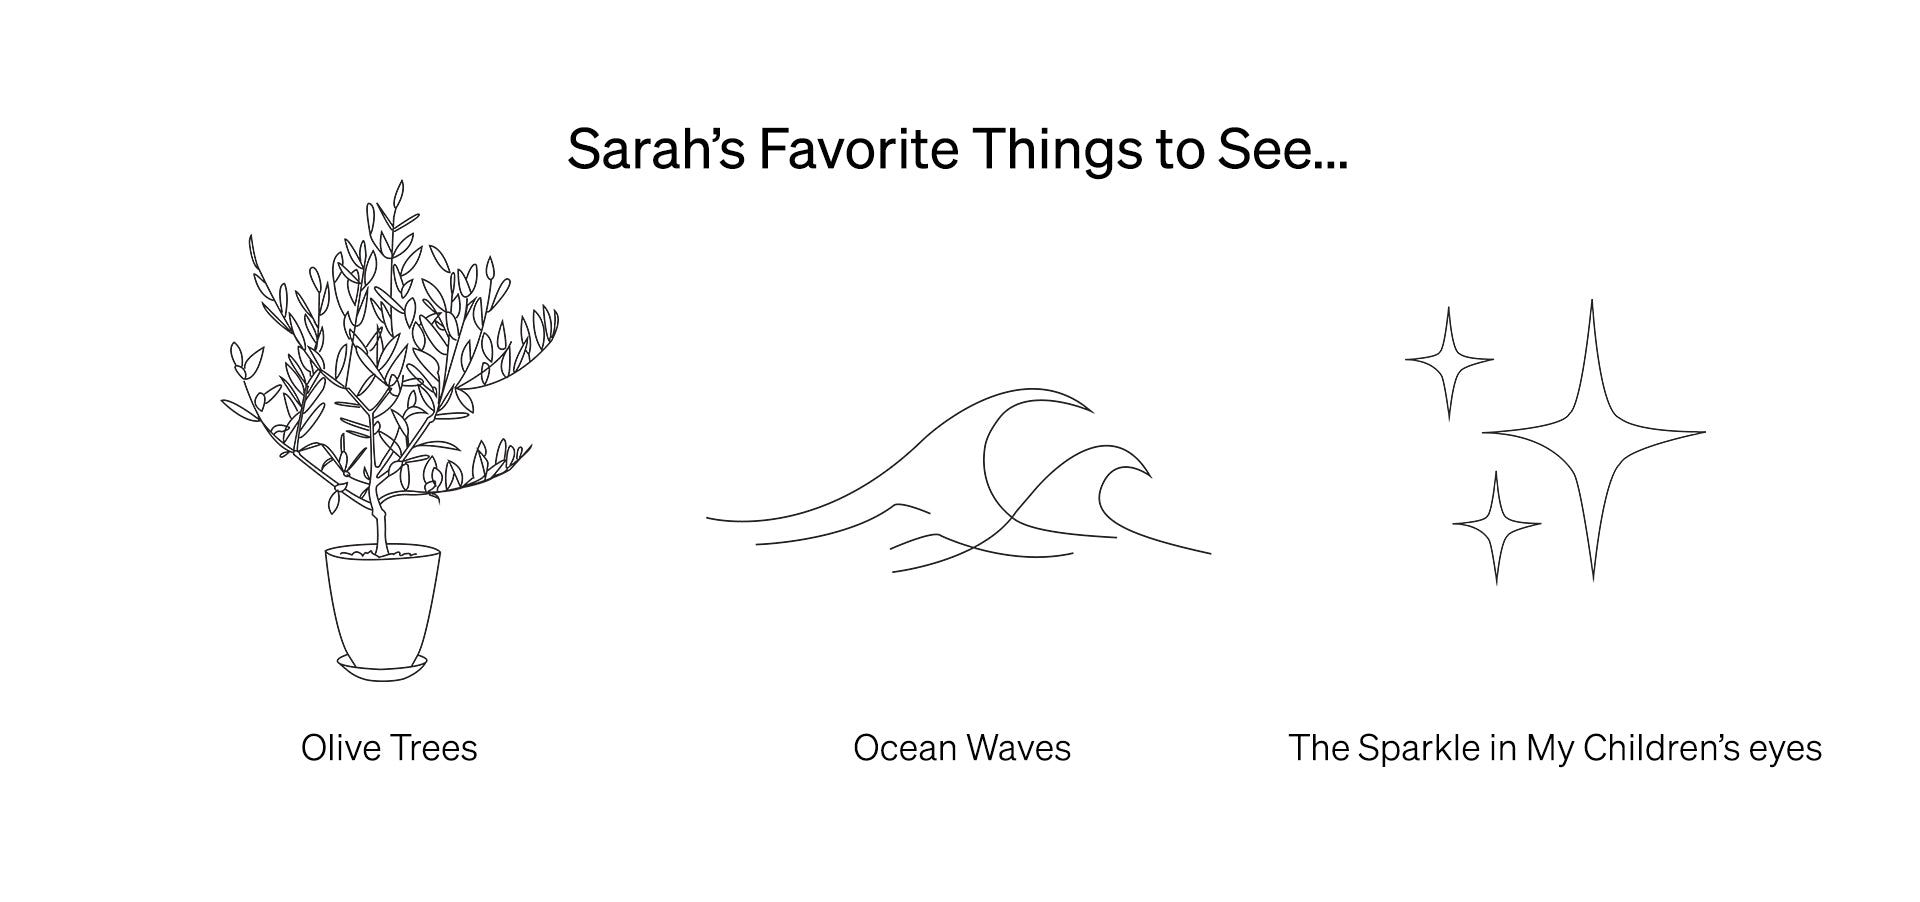 A black and white line drawing of Sarah Solis' favorite things to see include olive trees with an illustration of a small potted olive tree, ocean waves with an illustration of waves and the sparkle in her children's eyes with illustrated stars.